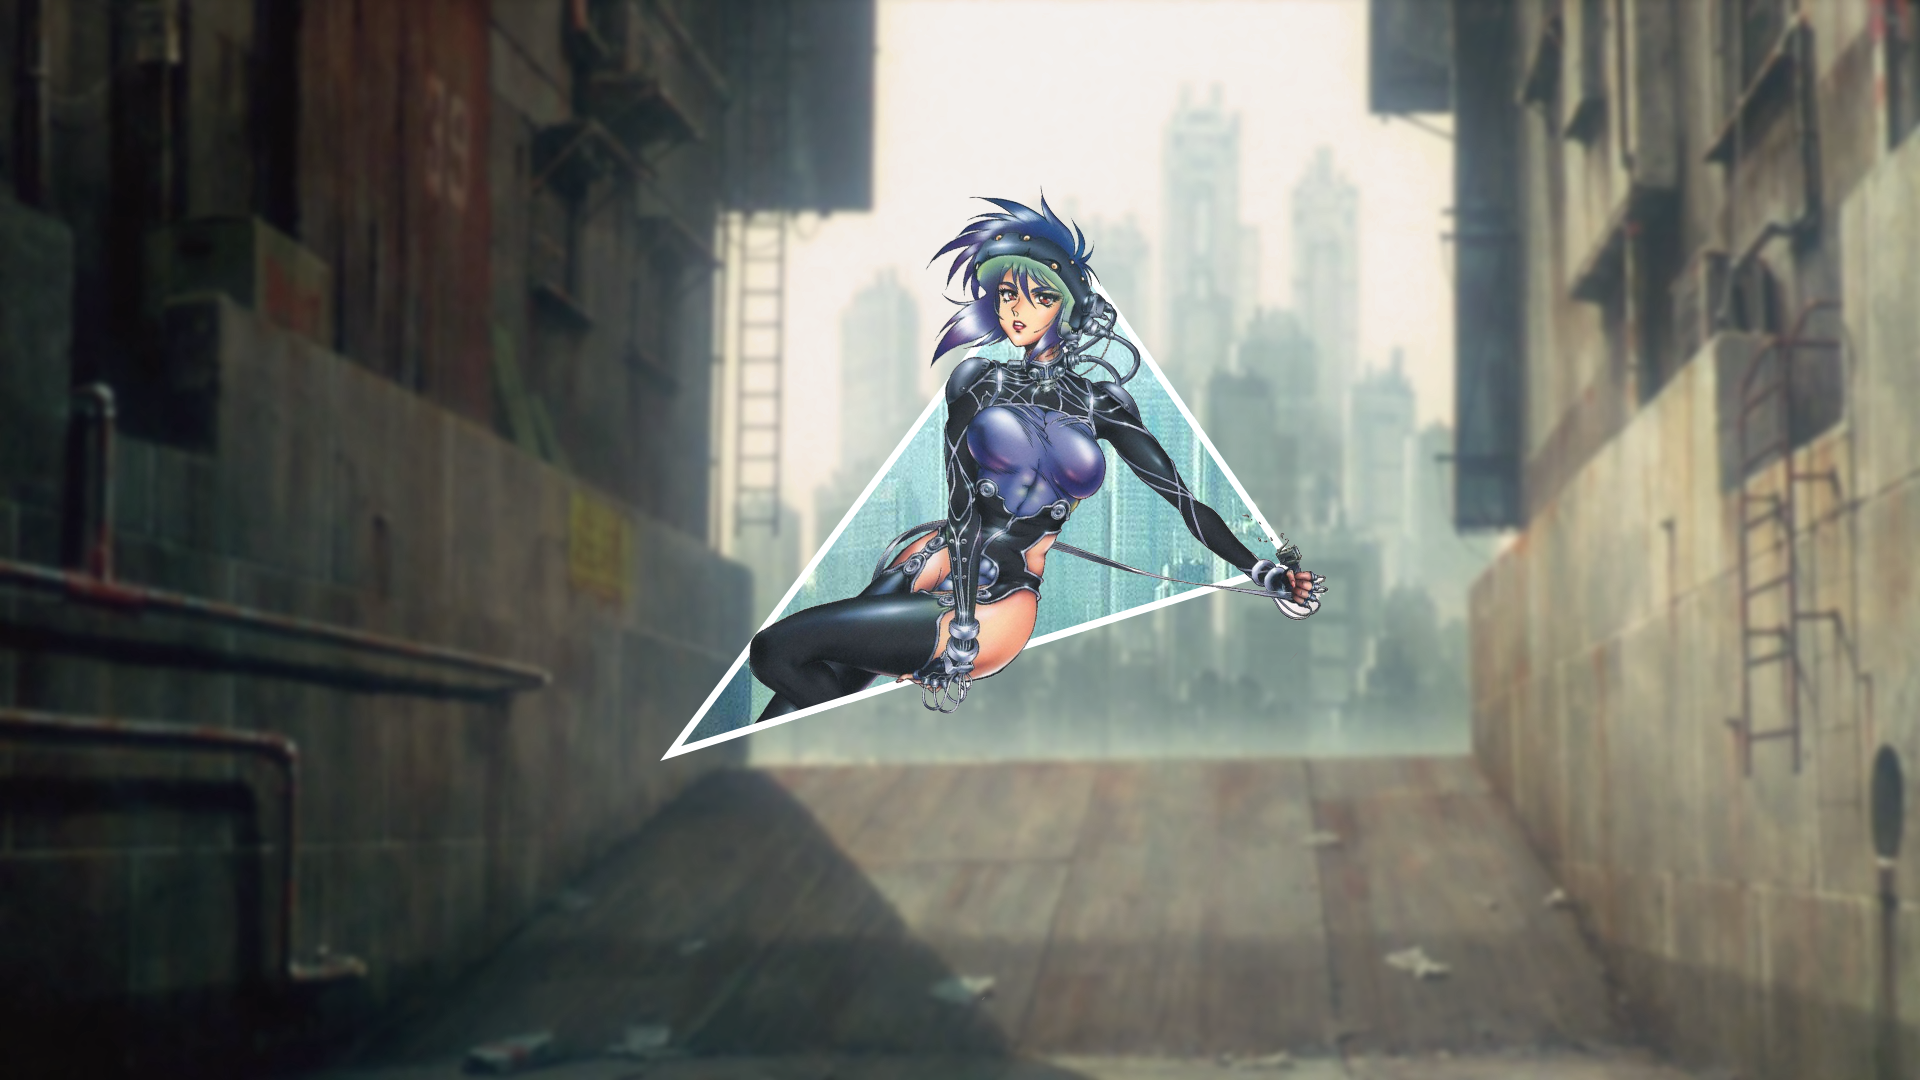 Ghost In The Shell Motoko Kusanagi Piture In Picture Picture In Picture 1920x1080